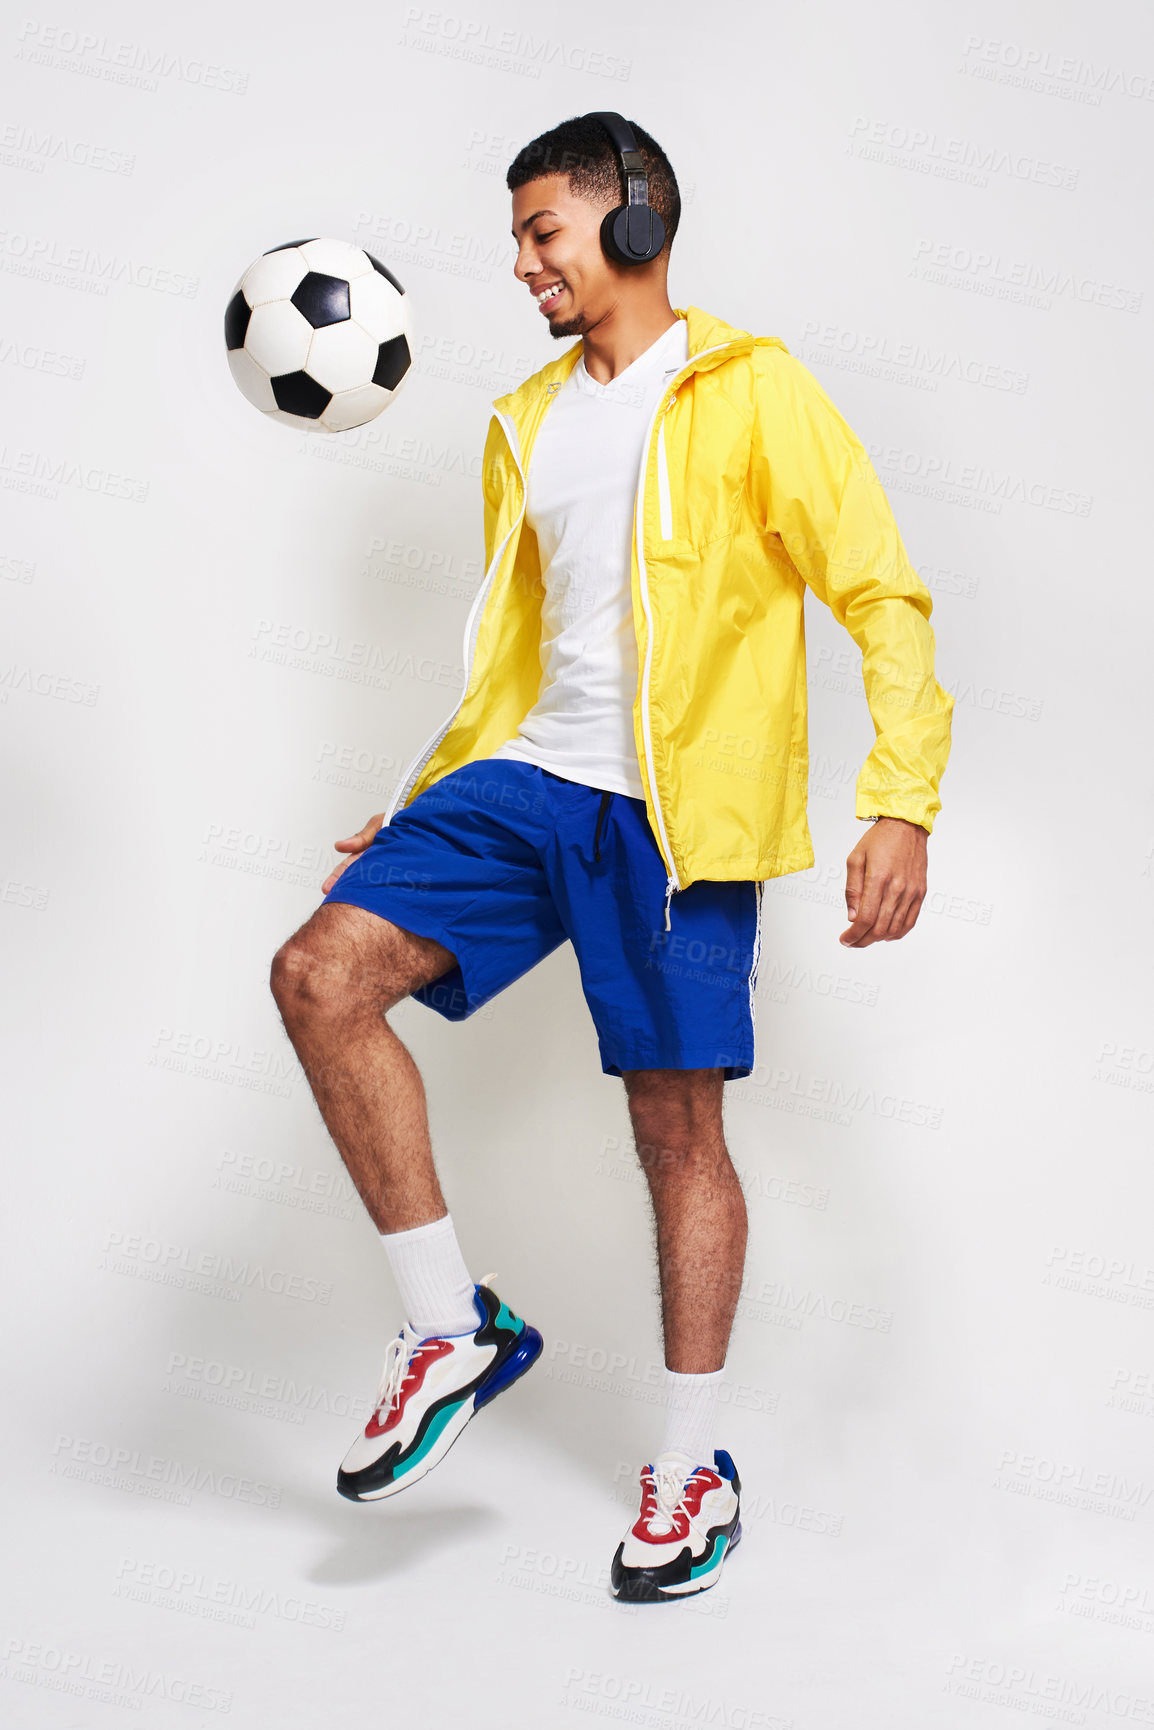 Buy stock photo Studio shot of a handsome young man listening to music while kicking a soccer ball in the air inside of a studio